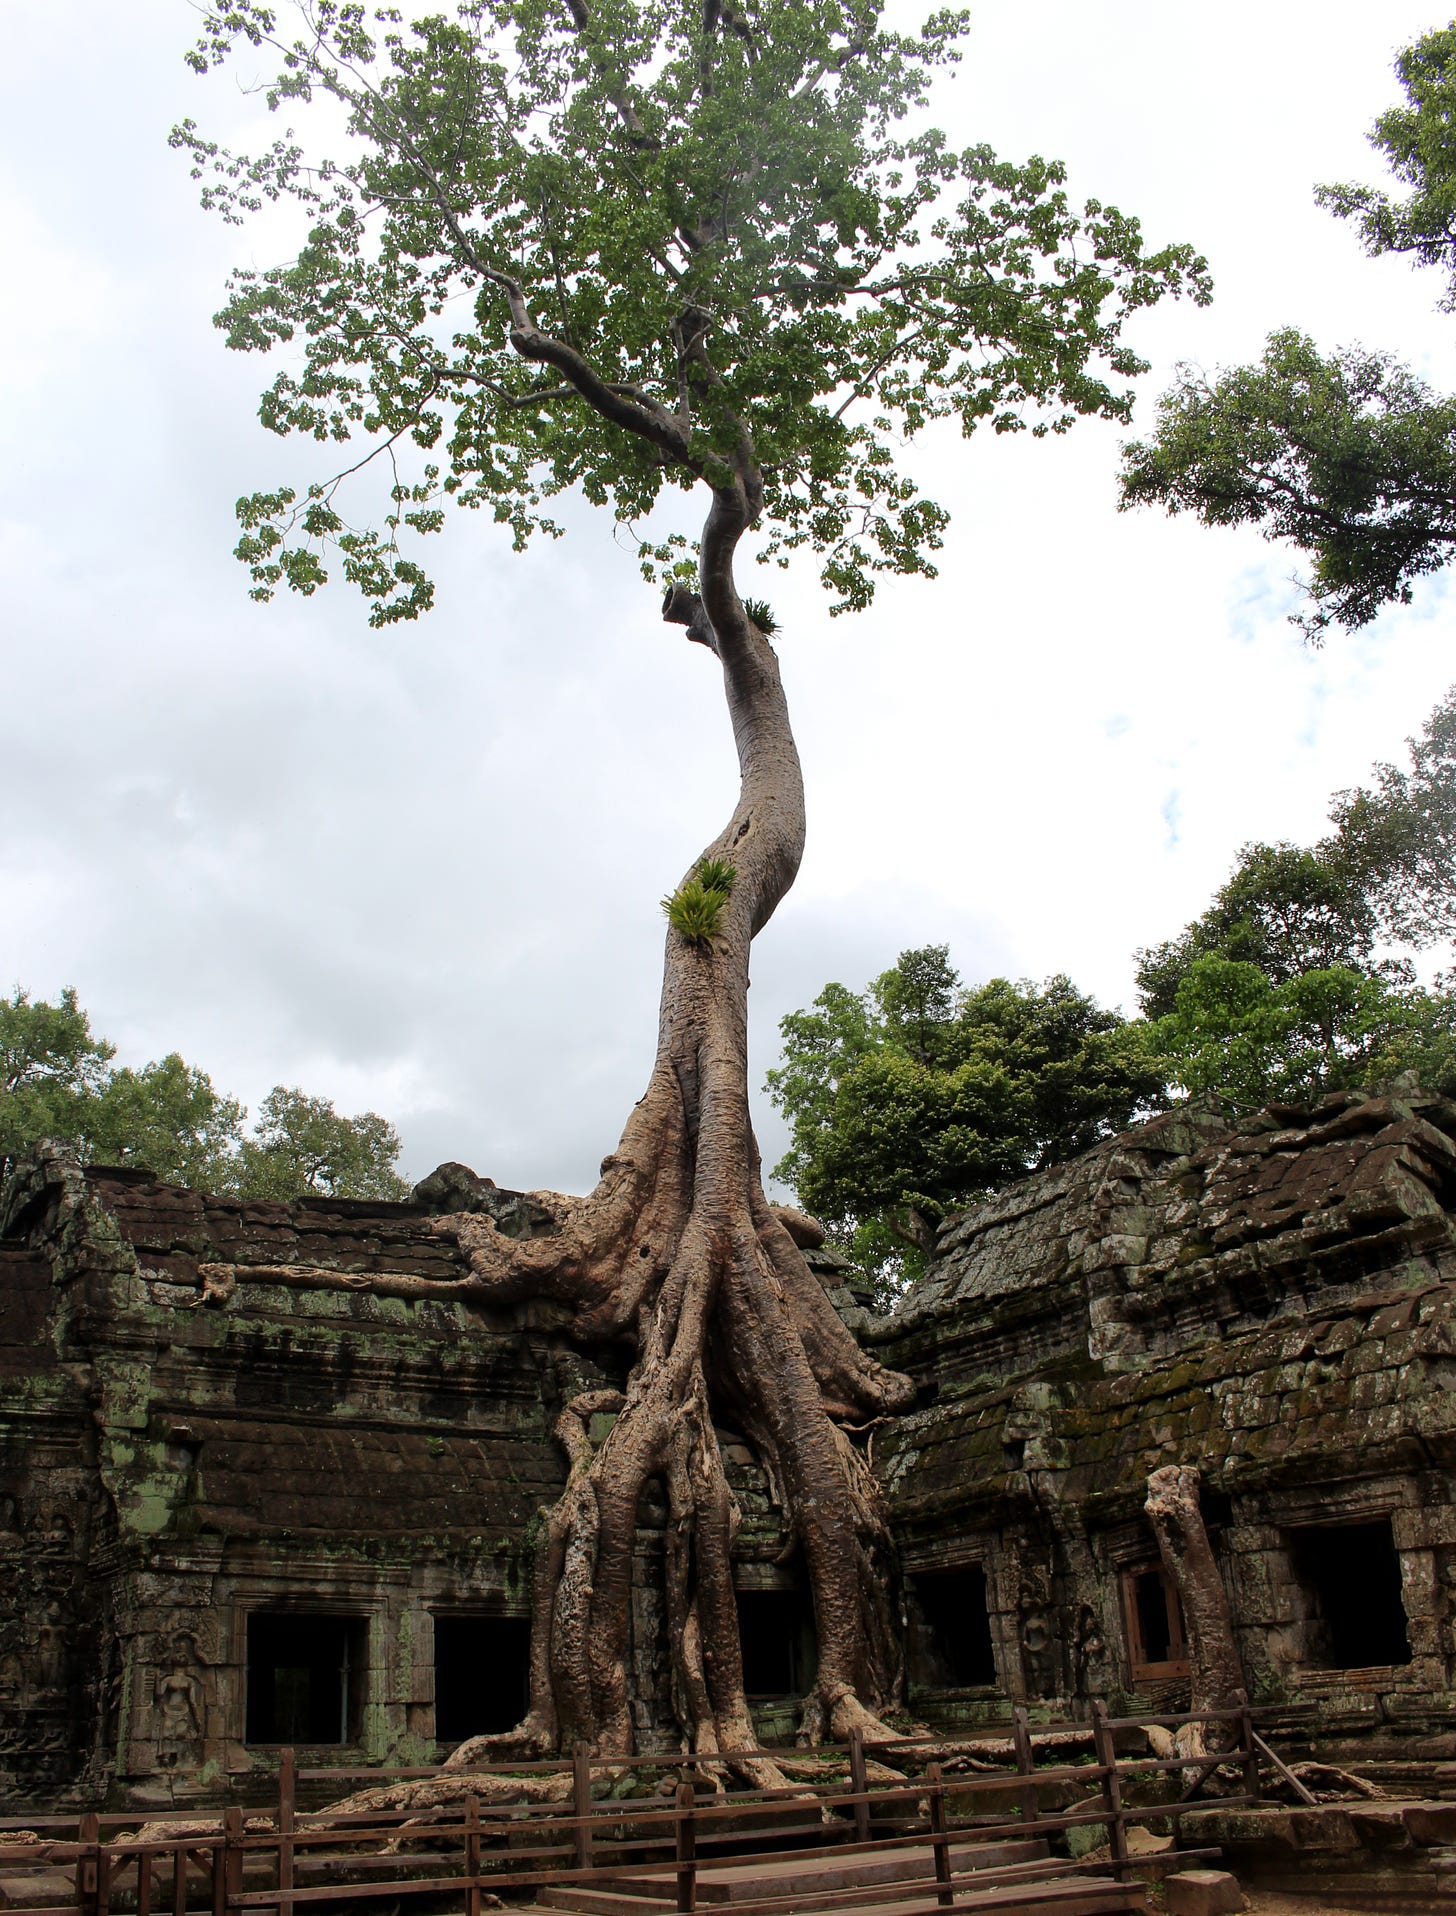 A giant tree with lush green leaves is growing out of a yellowed temple.